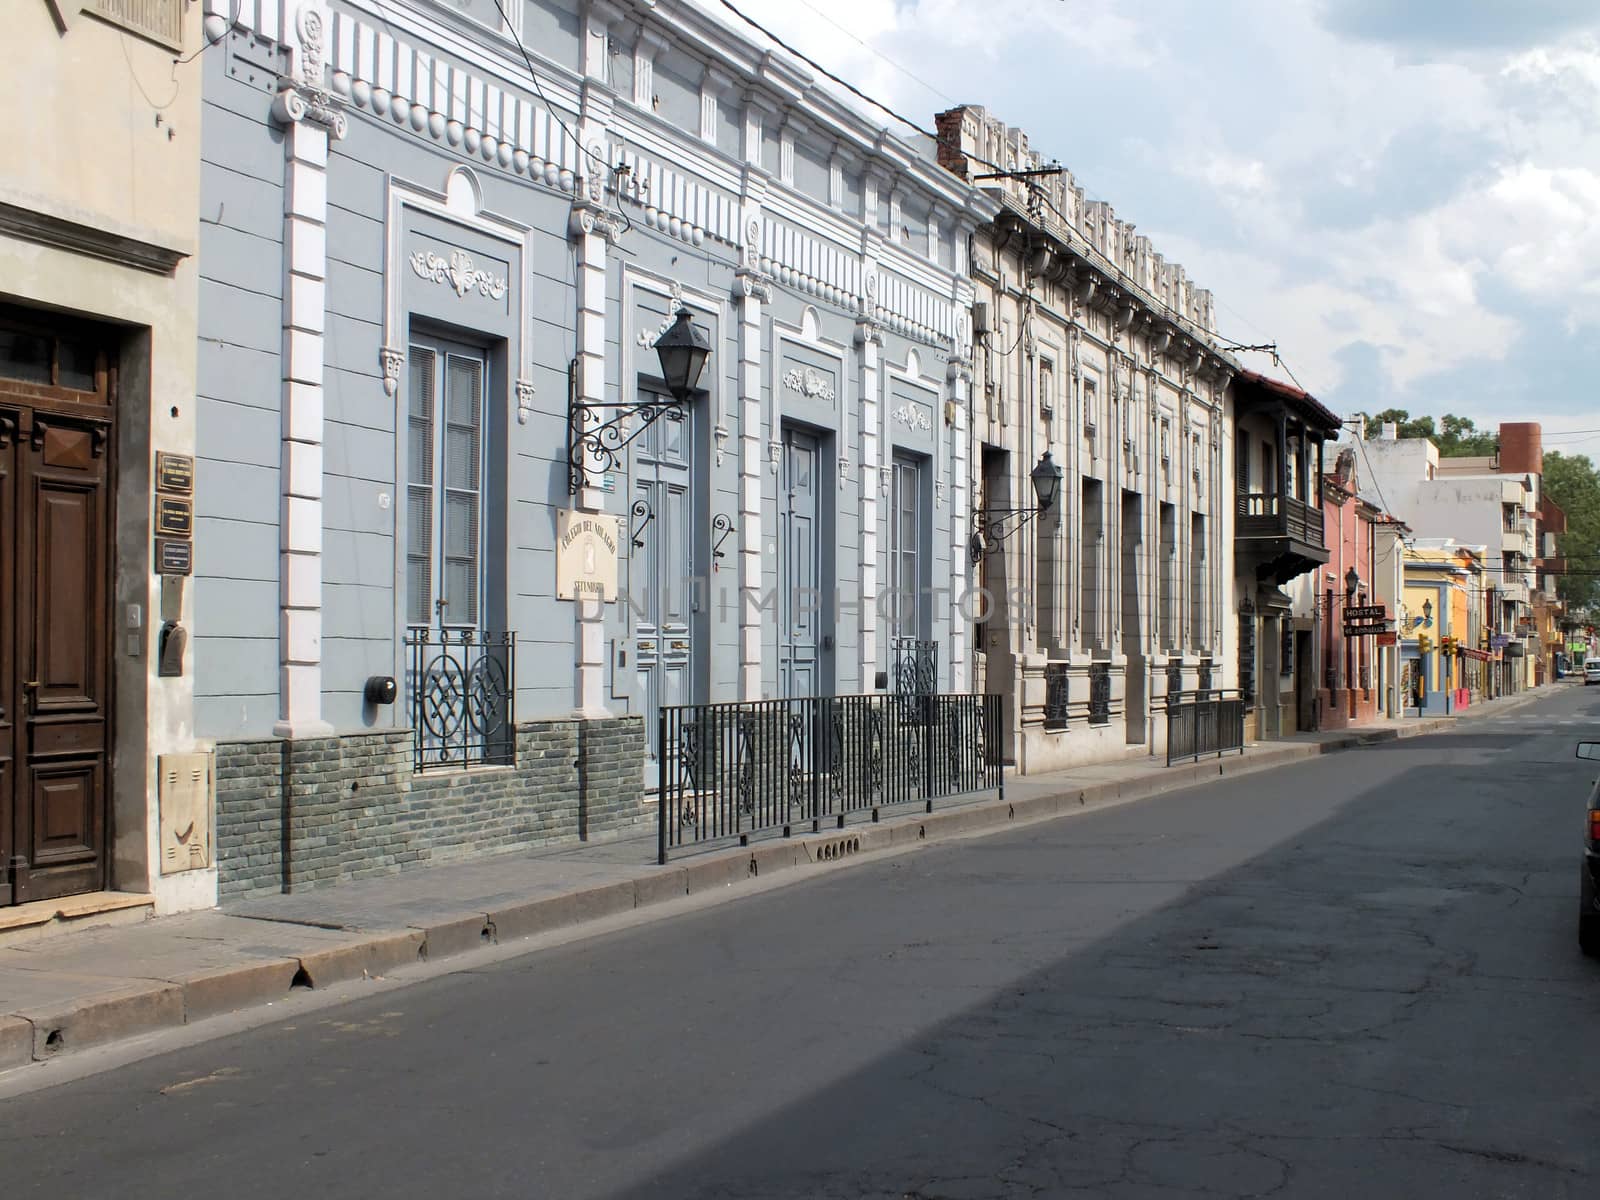 A typical street in the old city of Salta, Argentina